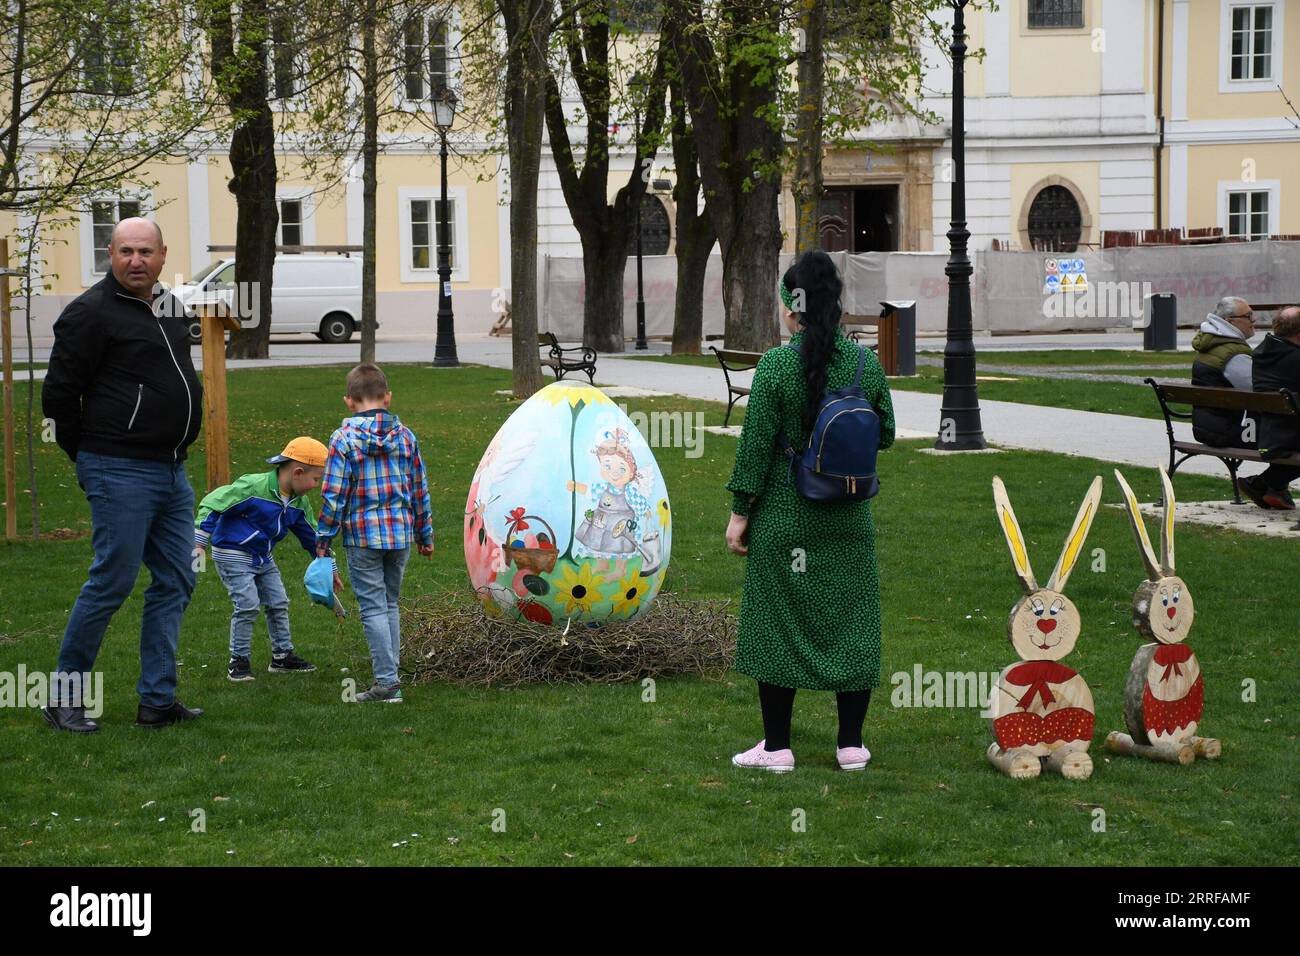 220409 -- BJELOVAR CROATIA, April 9, 2022 -- People look at a big Easter egg in central Bjelovar, Croatia, on April 9, 2022.  via Xinhua CROATIA-BJELOVAR-EASTER EGGS DamirxSpehar/PIXSELL PUBLICATIONxNOTxINxCHN Stock Photo